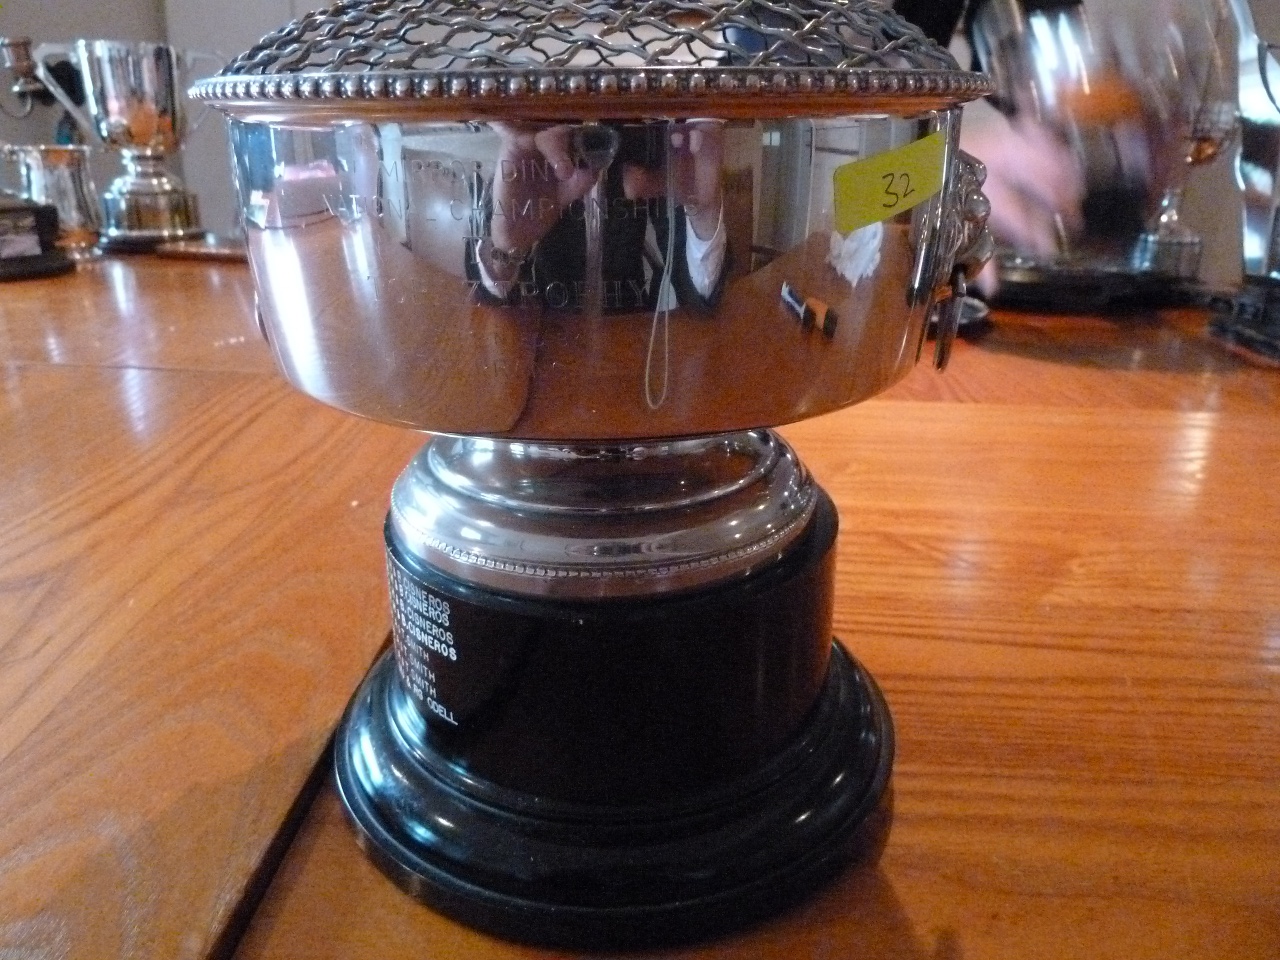 A silver rosebowl with a black plastic base